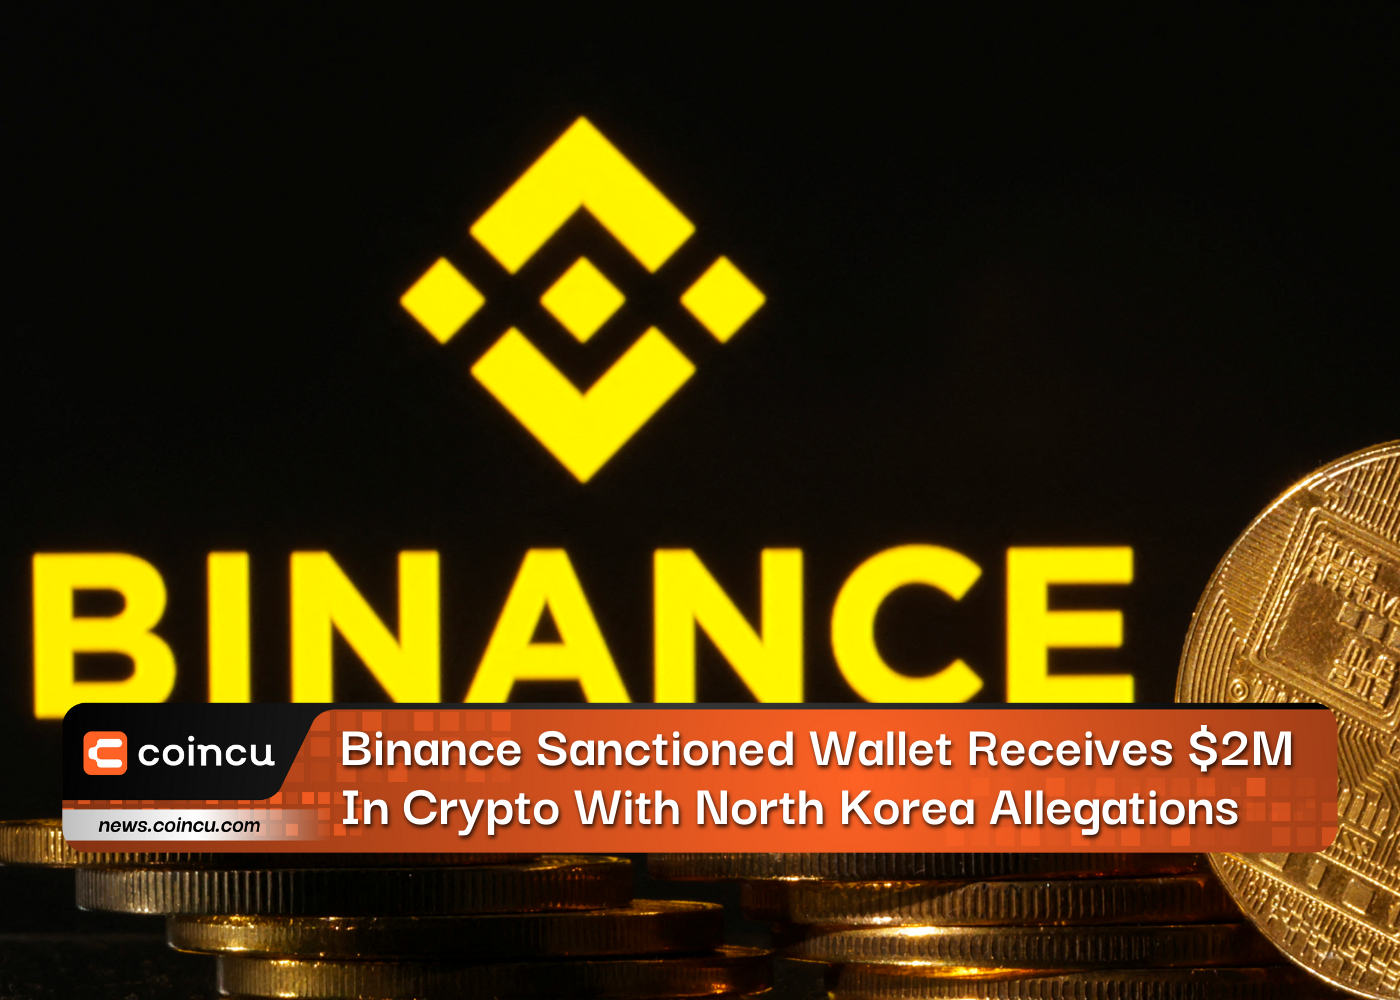 Binance Sanctioned Wallet Receives $2M in Crypto With North Korea Allegations